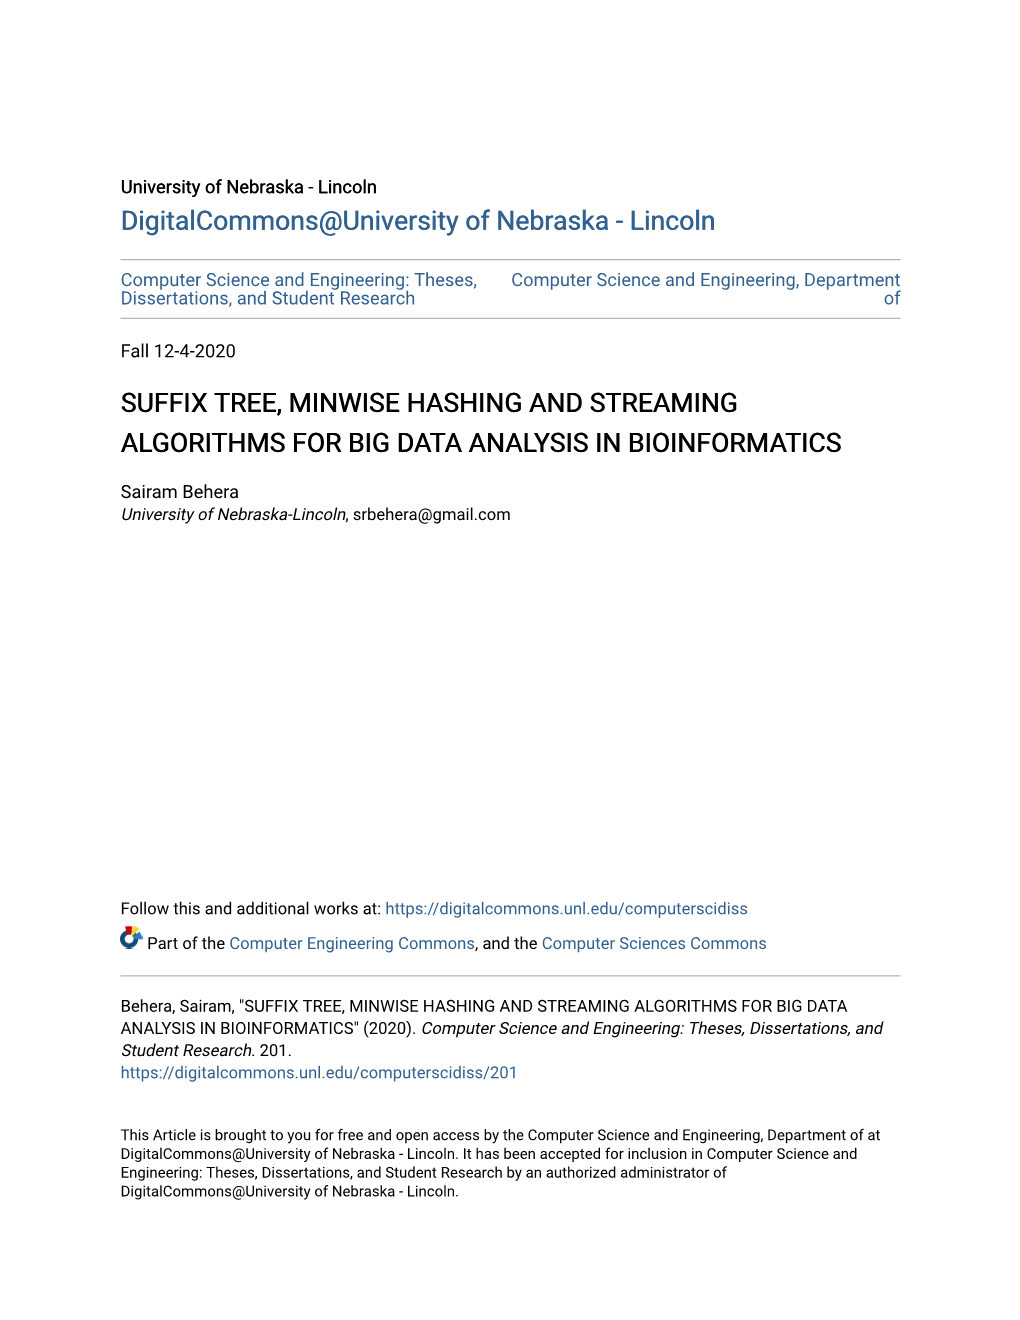 Suffix Tree, Minwise Hashing and Streaming Algorithms for Big Data Analysis in Bioinformatics